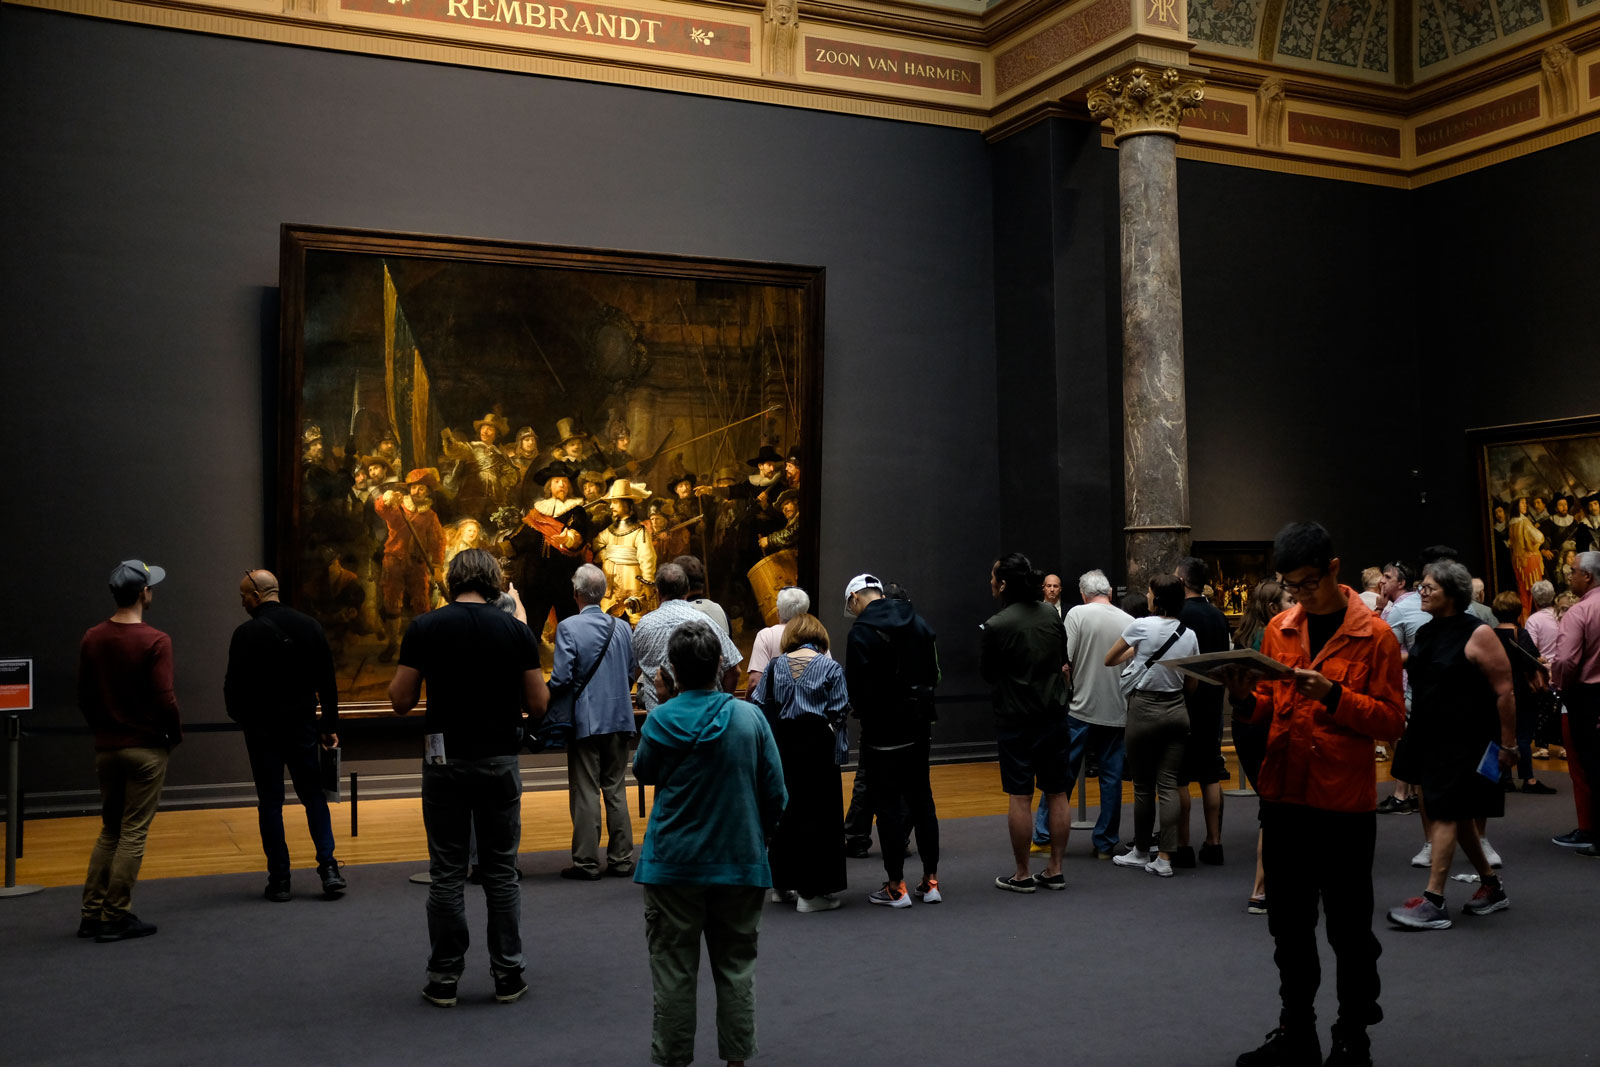 A crowd of onlookers at the Rijksmuseum in front of The Night Watch